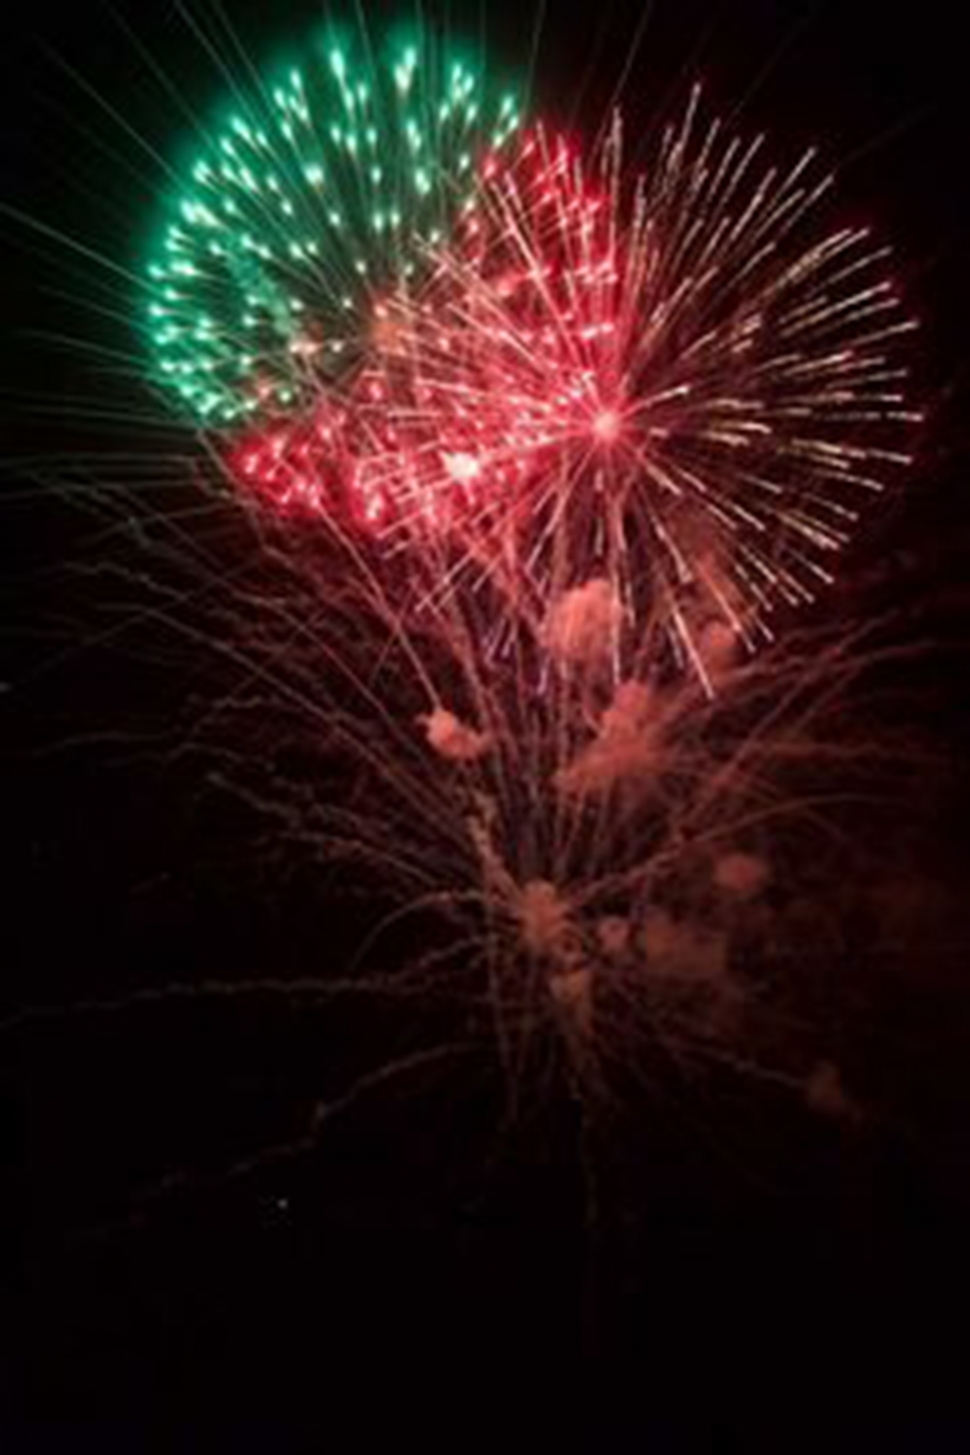 On Sunday, July 3rd, the City of Fillmore hosted their Annual 4th of July fireworks display at Fillmore Middle School. This year’s show was held a day before the fourth at 9pm (sundown). Photo credit Angel Esquivel-AE News.